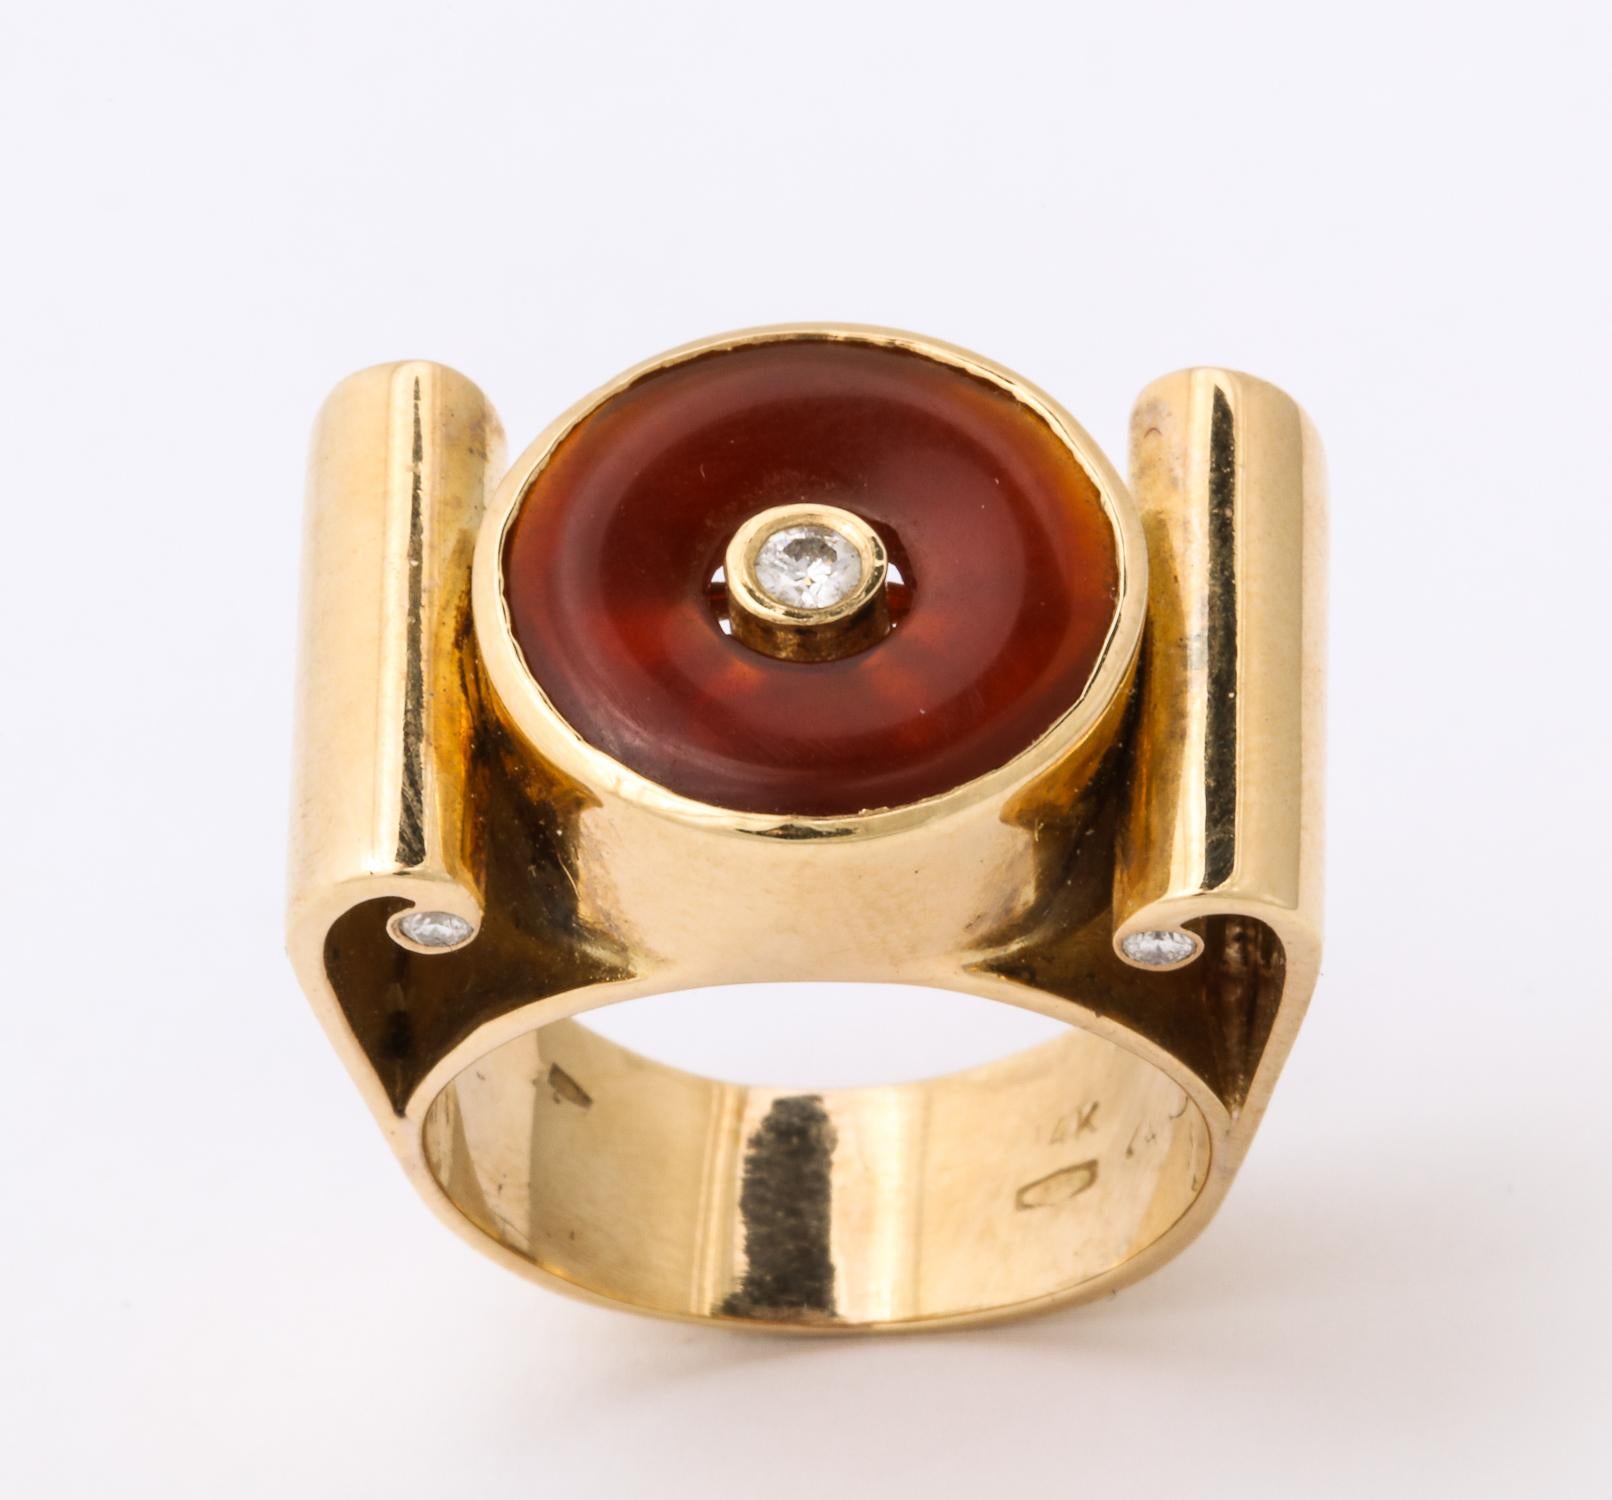 One Unisex Geometric And High Style Ring Created In 14kt Yellow Gold. Ring Is Centering One Reddish Honey Colored Lifesaver Cut Carnelian Stone And Bezel Set With One .7Ct Full Cut Diamond In The Center. Ring Is Further Flanked By Four Bezel Set